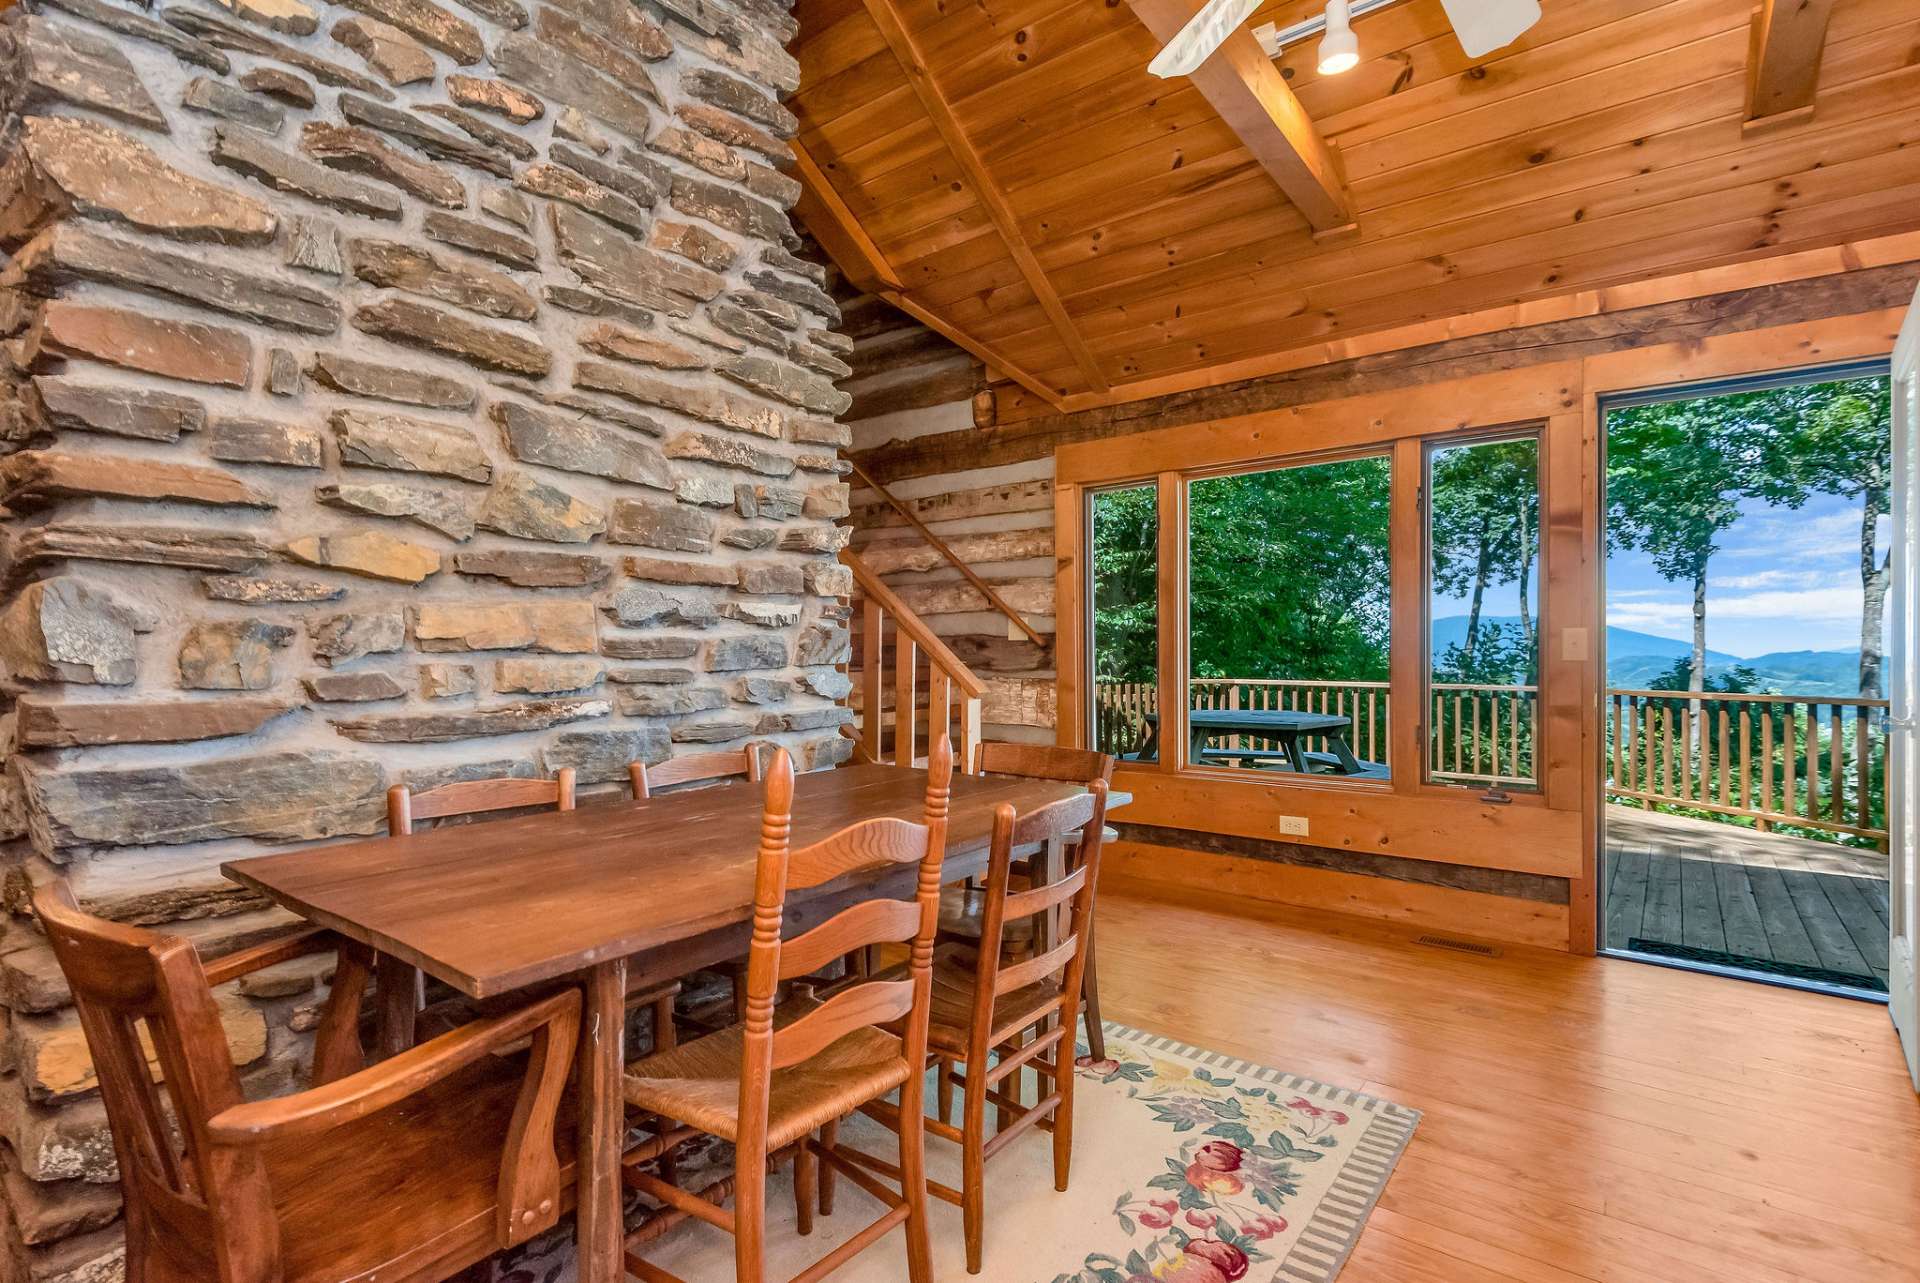 Enjoy dining with the views year-round. The cabin has multiple access points to the expansive back deck creating an easy flow for outdoor entertaining of family and friends.